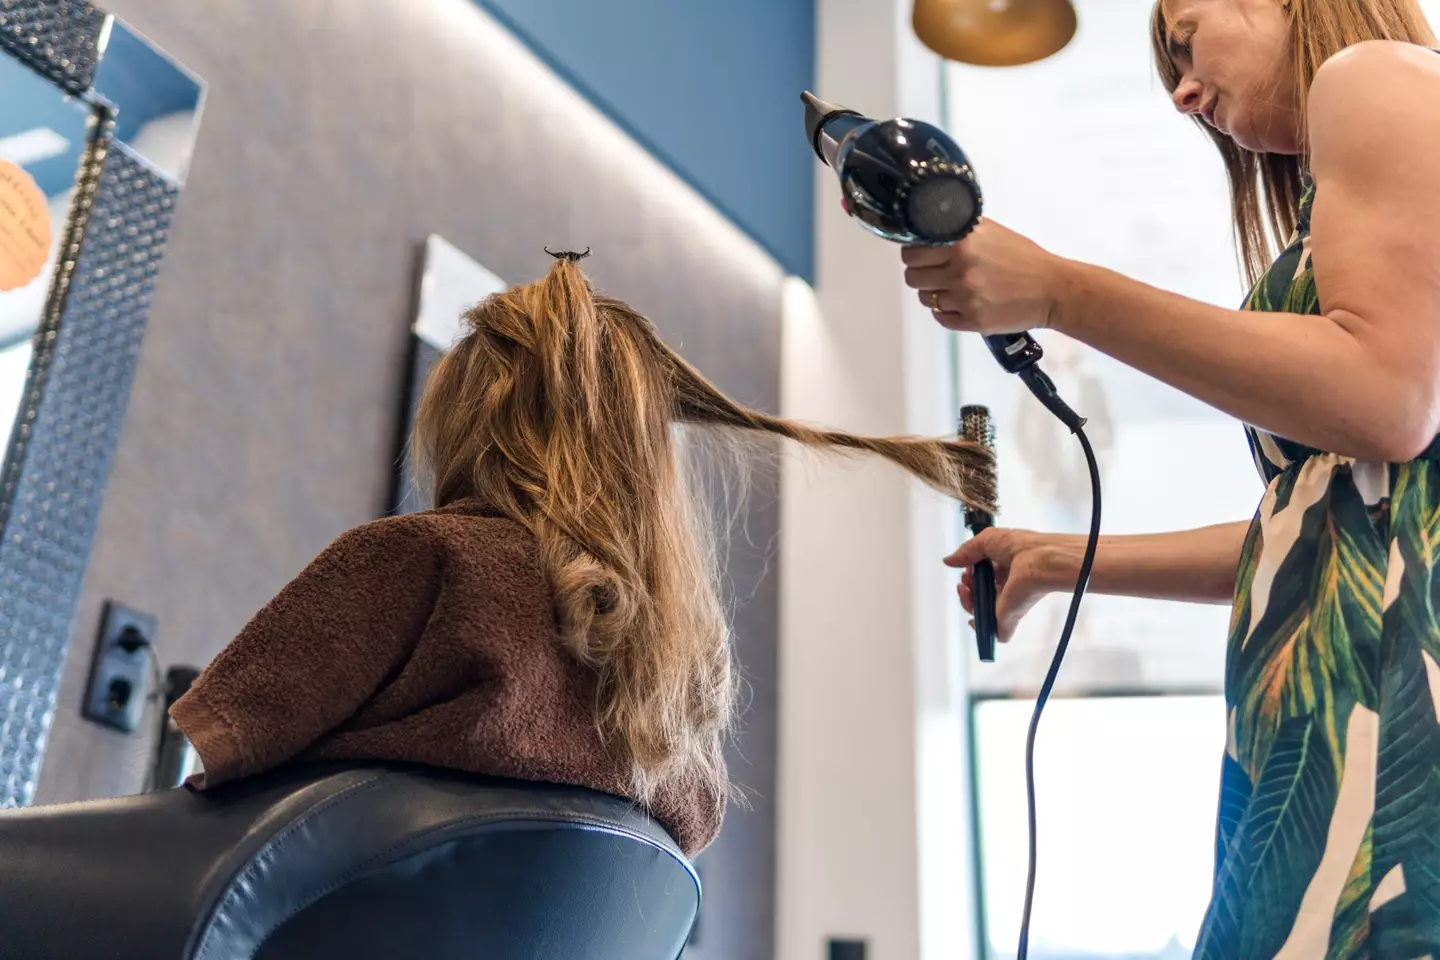 Customers can donate what they want for a haircut.